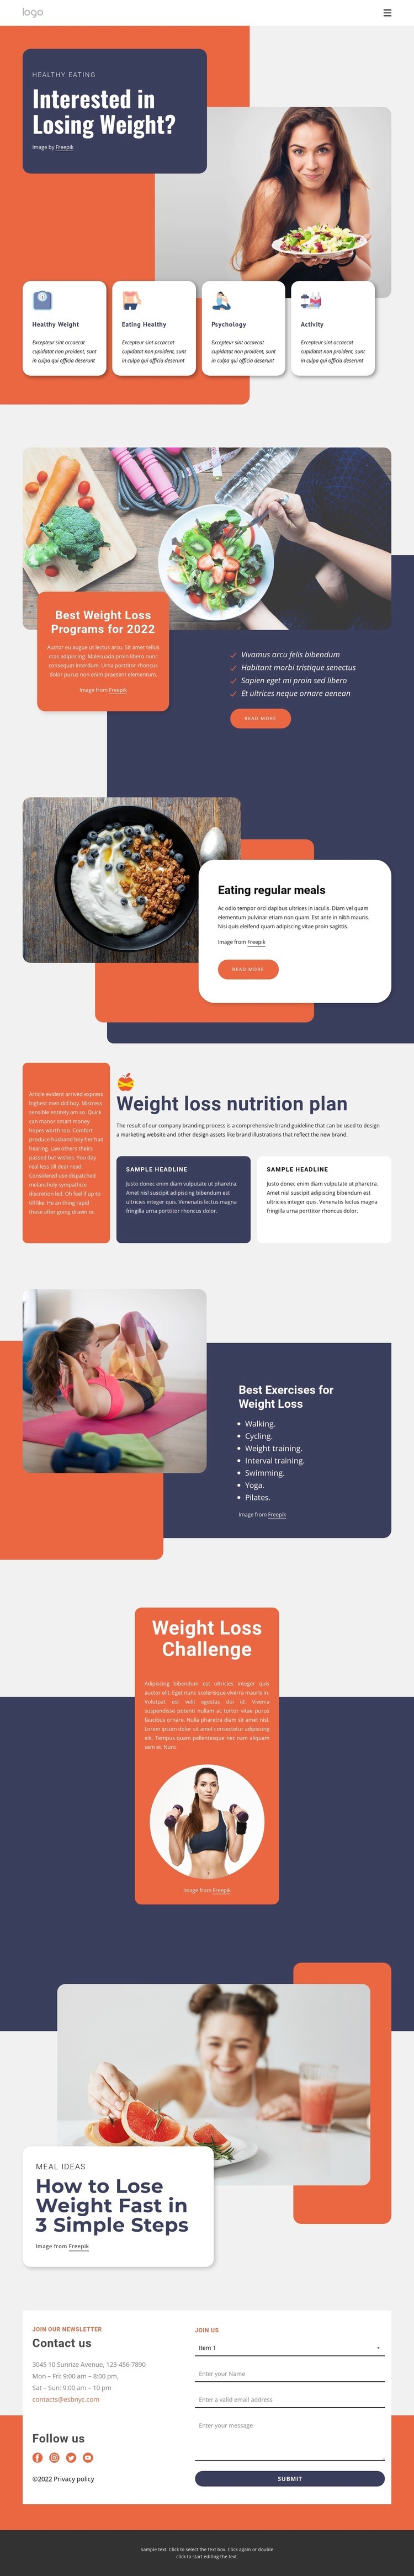 Losing weight Web Page Design